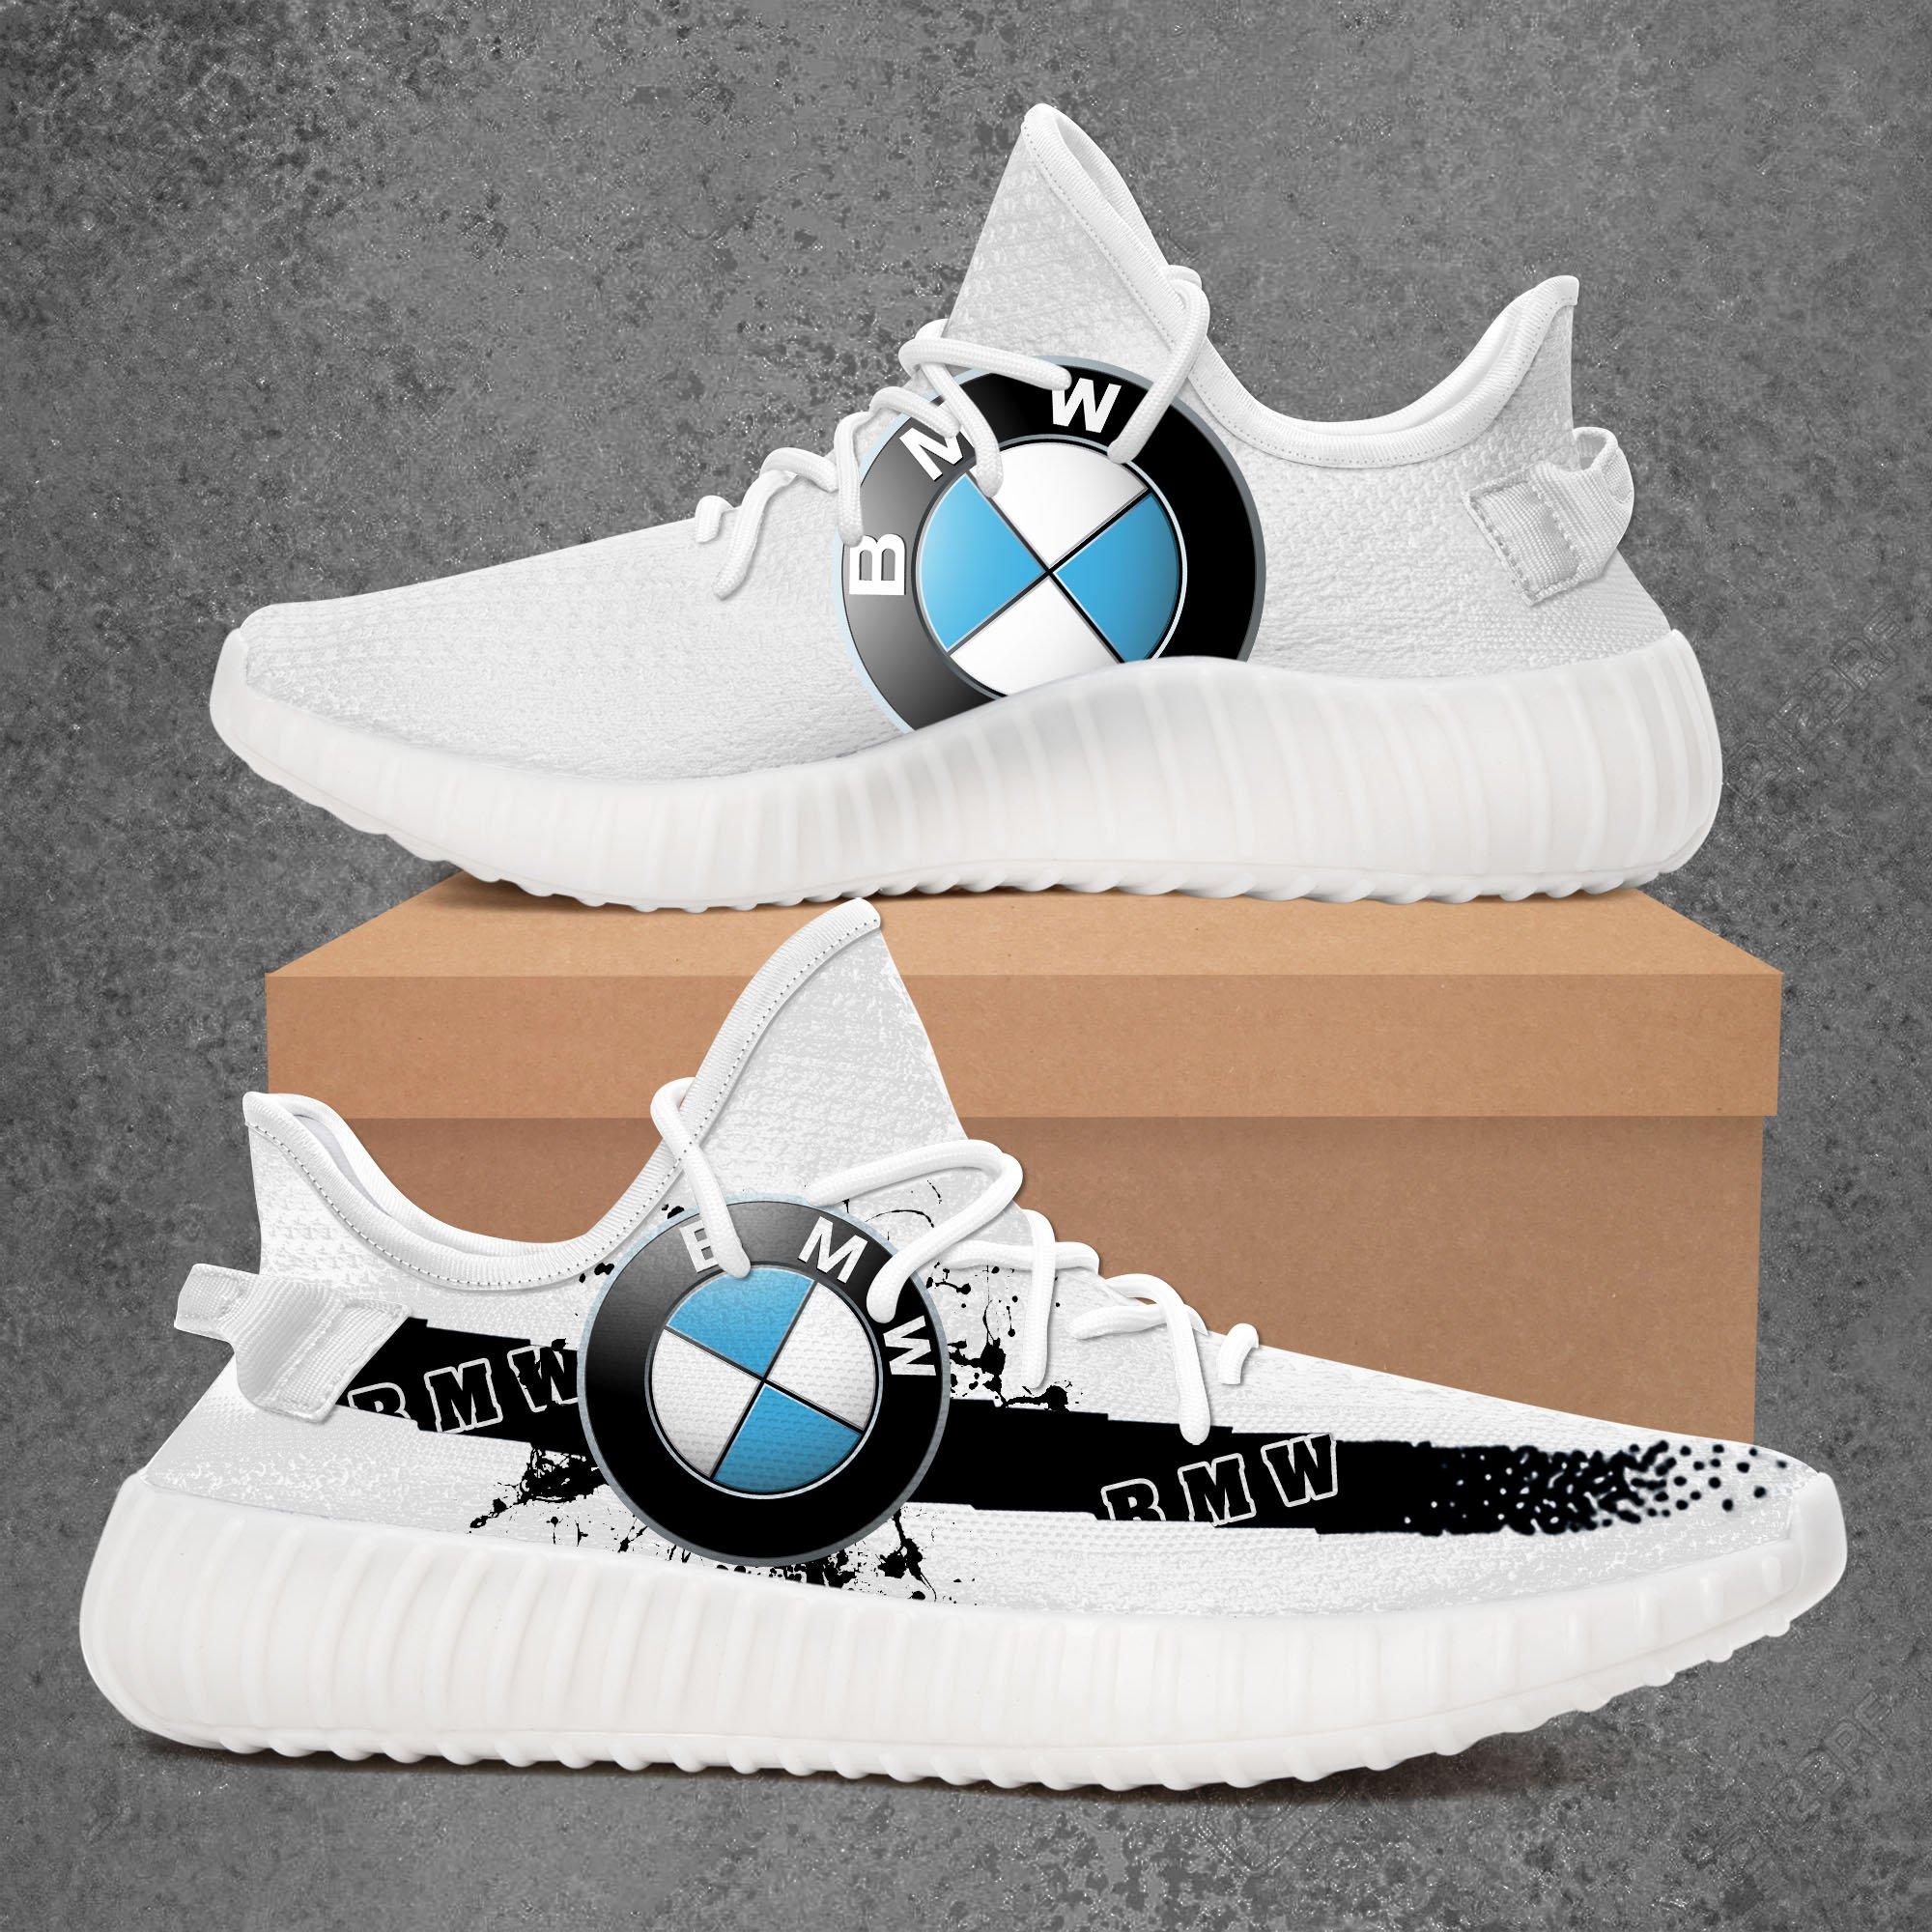 BMW Limited Edition White Yeezy Sneaker 